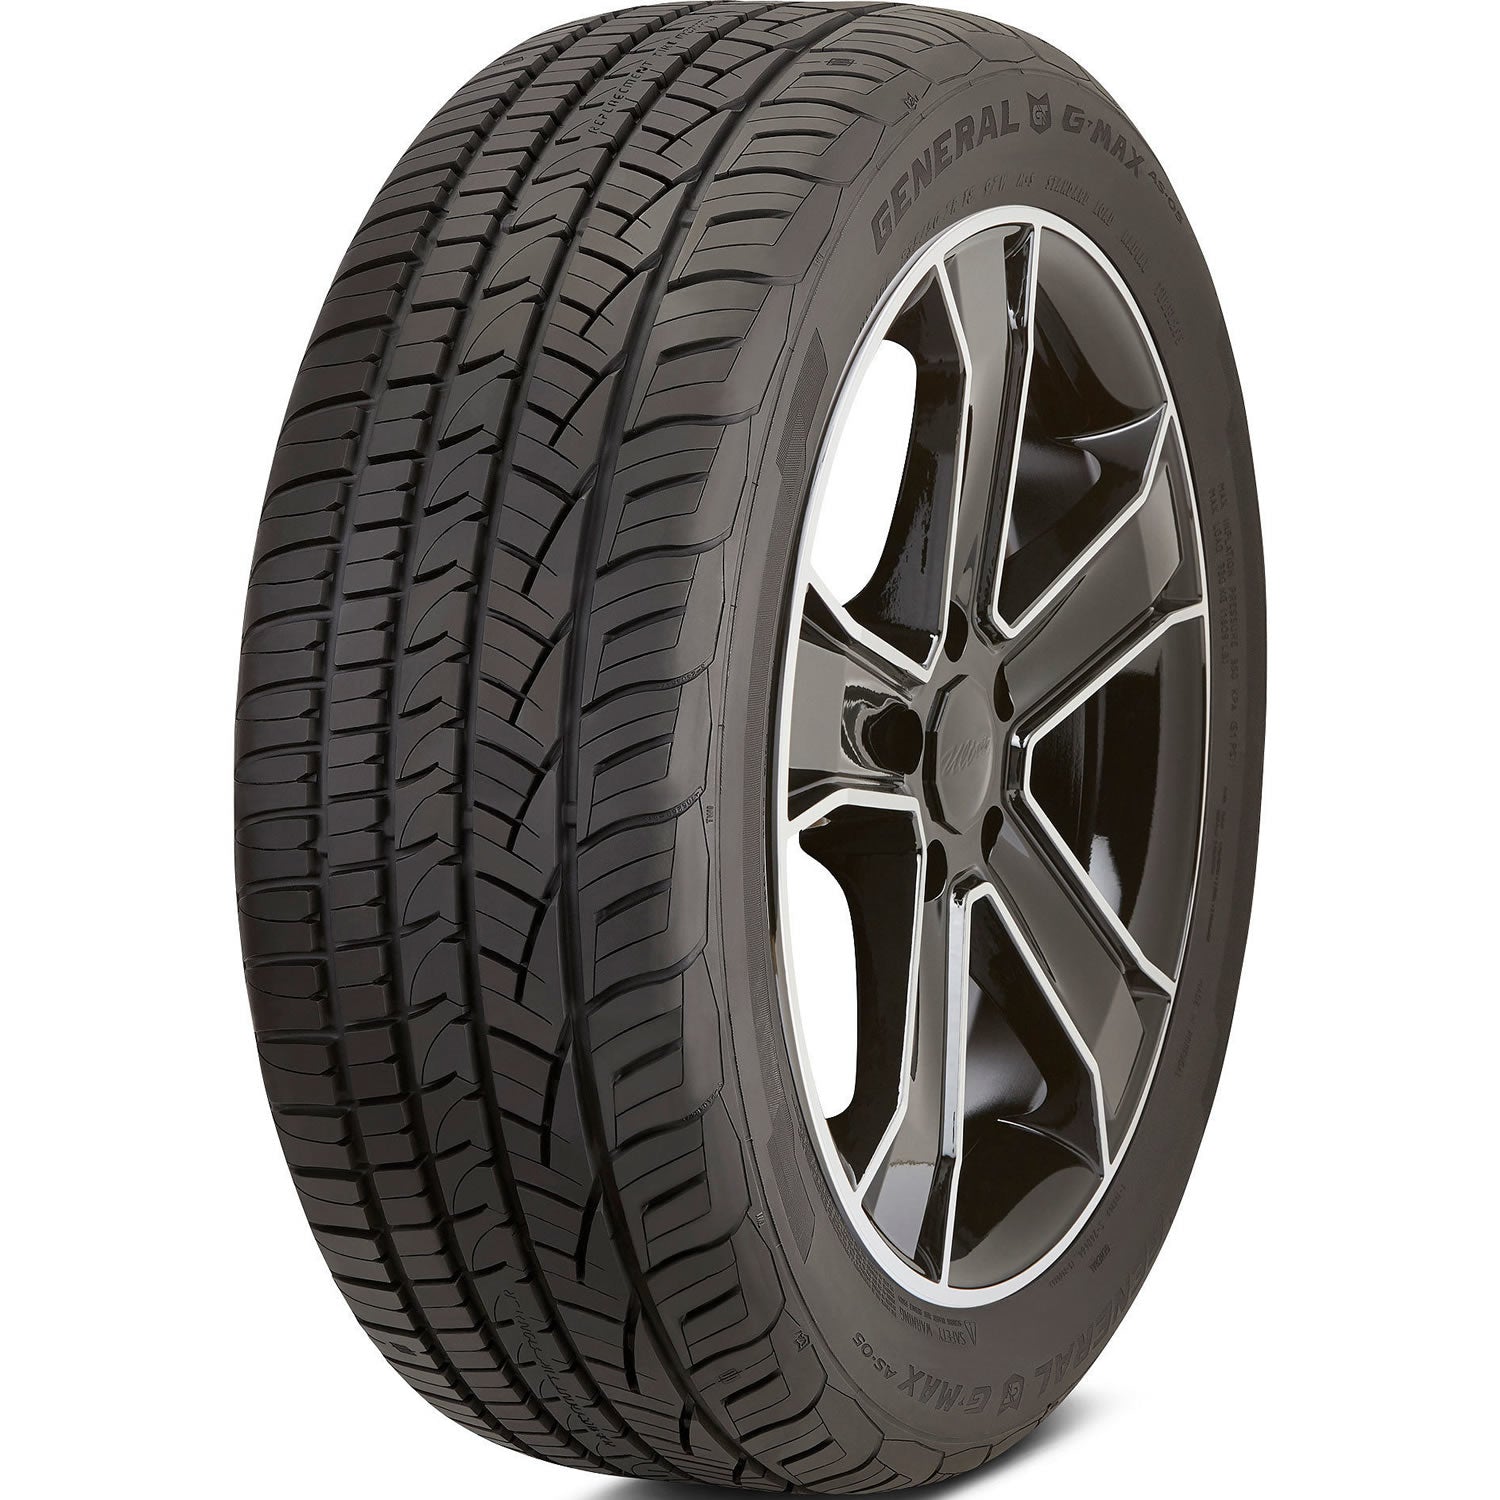 GENERAL G-MAX AS-05 245/40ZR19 (26.7X9.7R 19) Tires